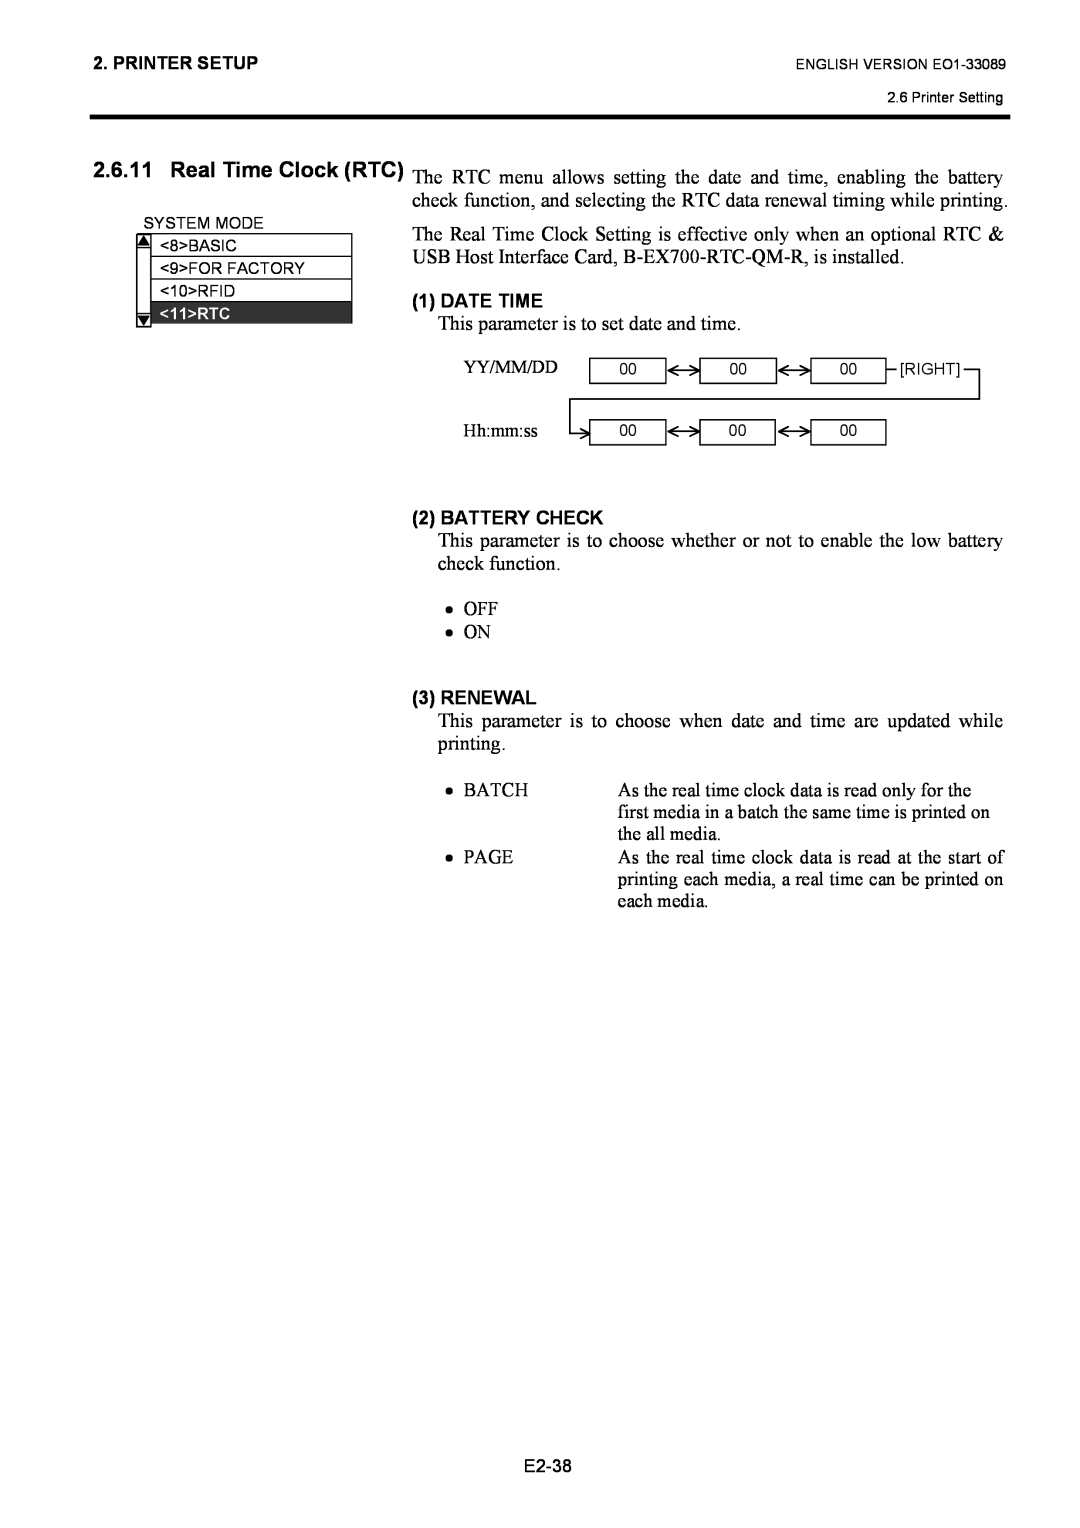 Toshiba B-EX4T1 manual This parameter is to set date and time 